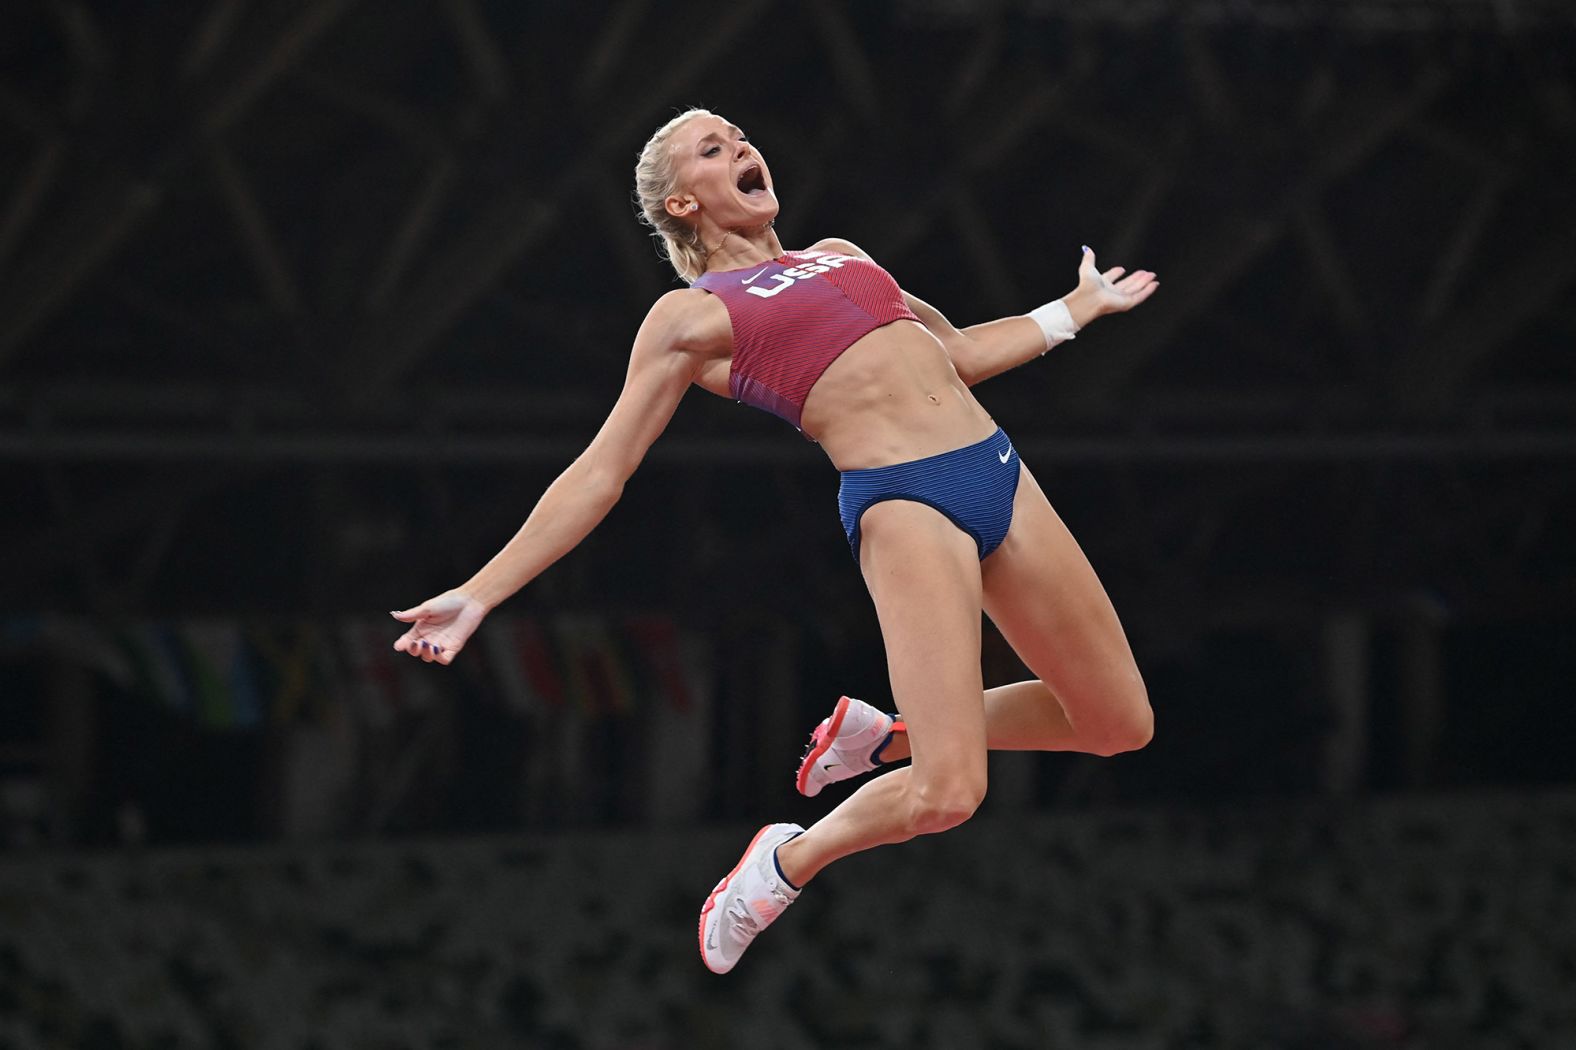 The United States' Katie Nageotte celebrates after clearing the bar in the pole vault final on August 5. Nageotte cleared a height of 4.90 meters <a href="index.php?page=&url=https%3A%2F%2Fwww.cnn.com%2Fworld%2Flive-news%2Ftokyo-2020-olympics-08-05-21-spt%2Fh_202cff9a9f8ad6a09d05f0698f05d506" target="_blank">to win the gold.</a>